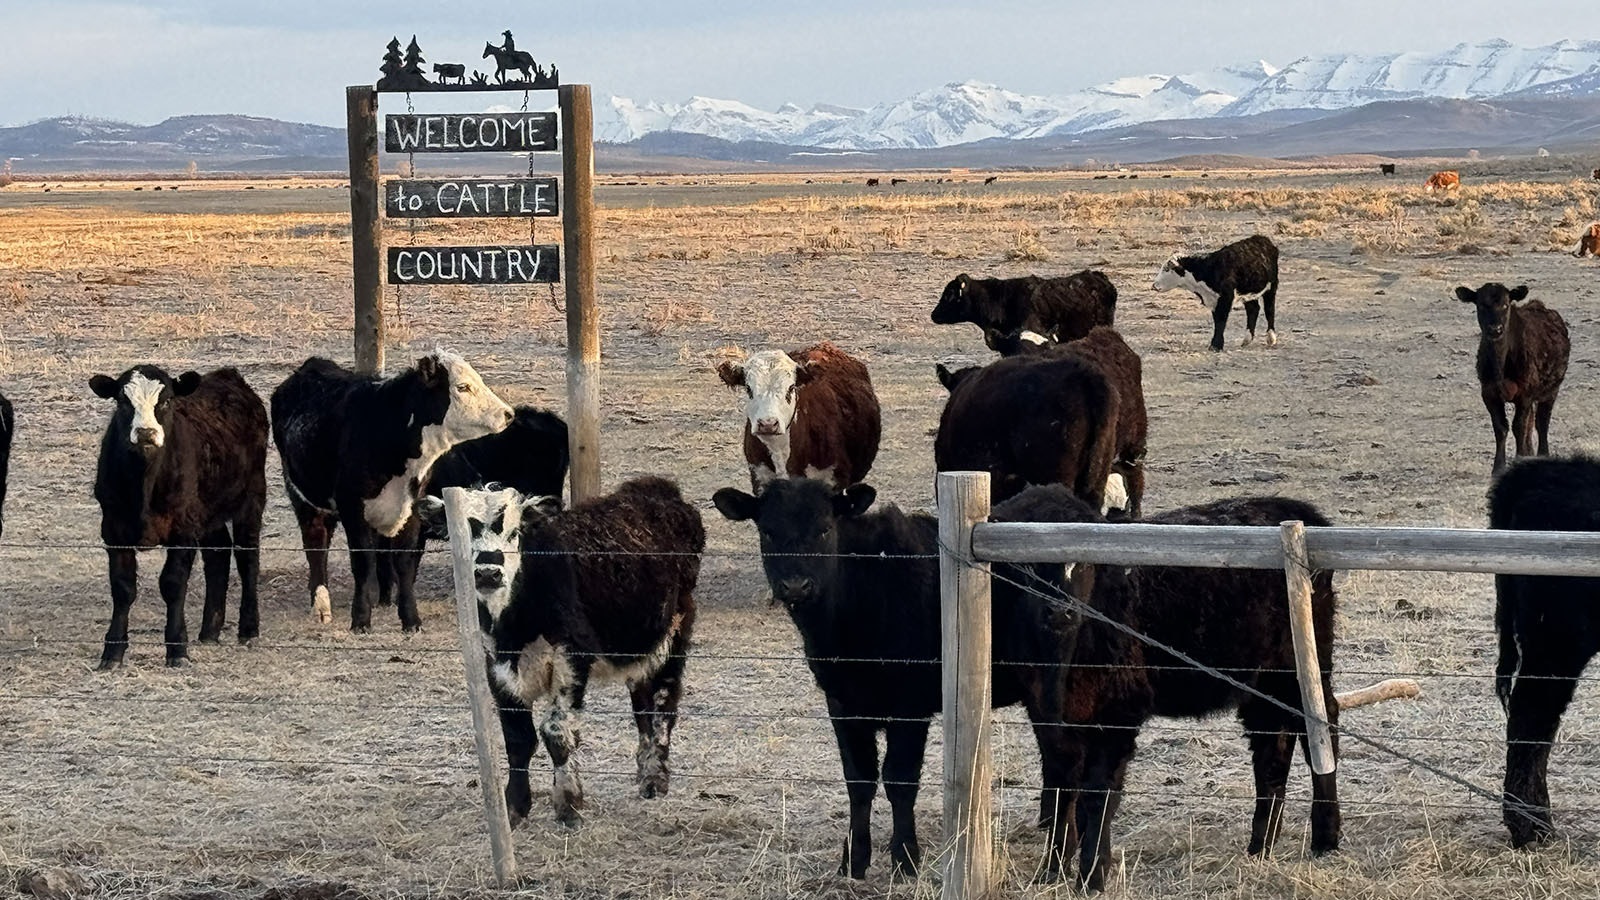 Cattle at Pape Ranch in Daniel. The town is located about 12 minutes to the west of Pinedale, and is known for cattle and horse ranching and fly-fishing along the Green River.